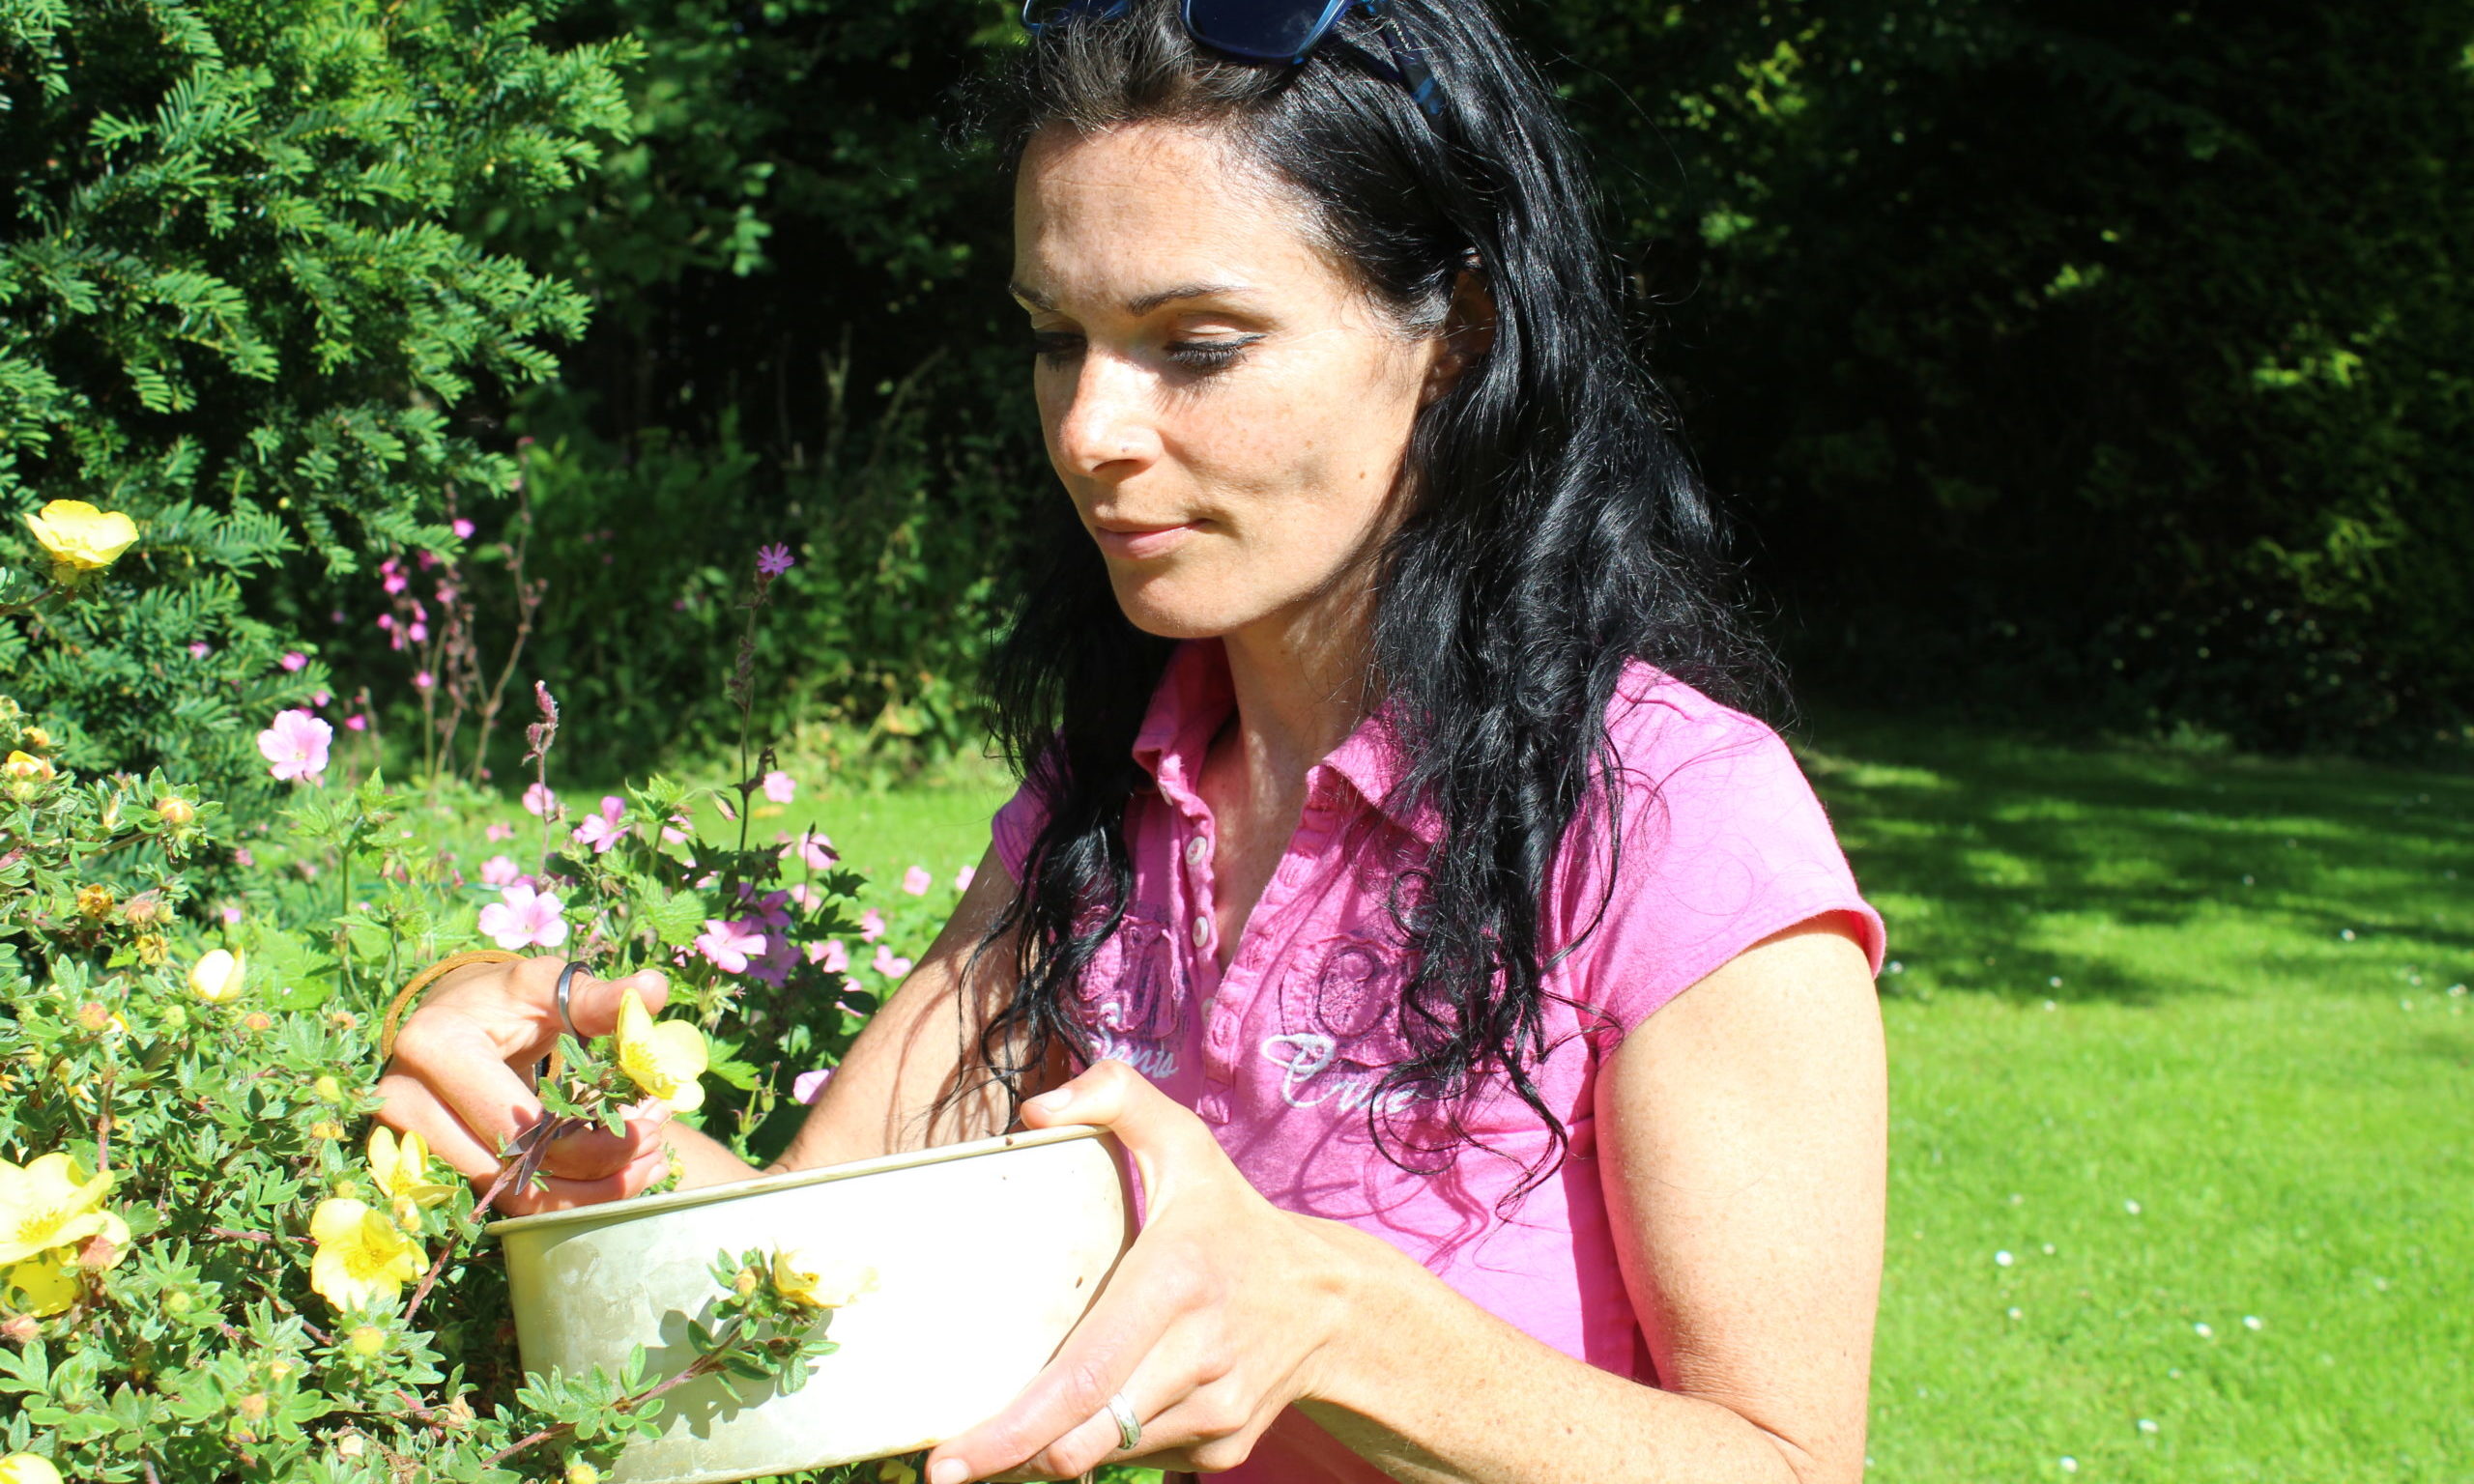 Gayle collects flowers from the garden.